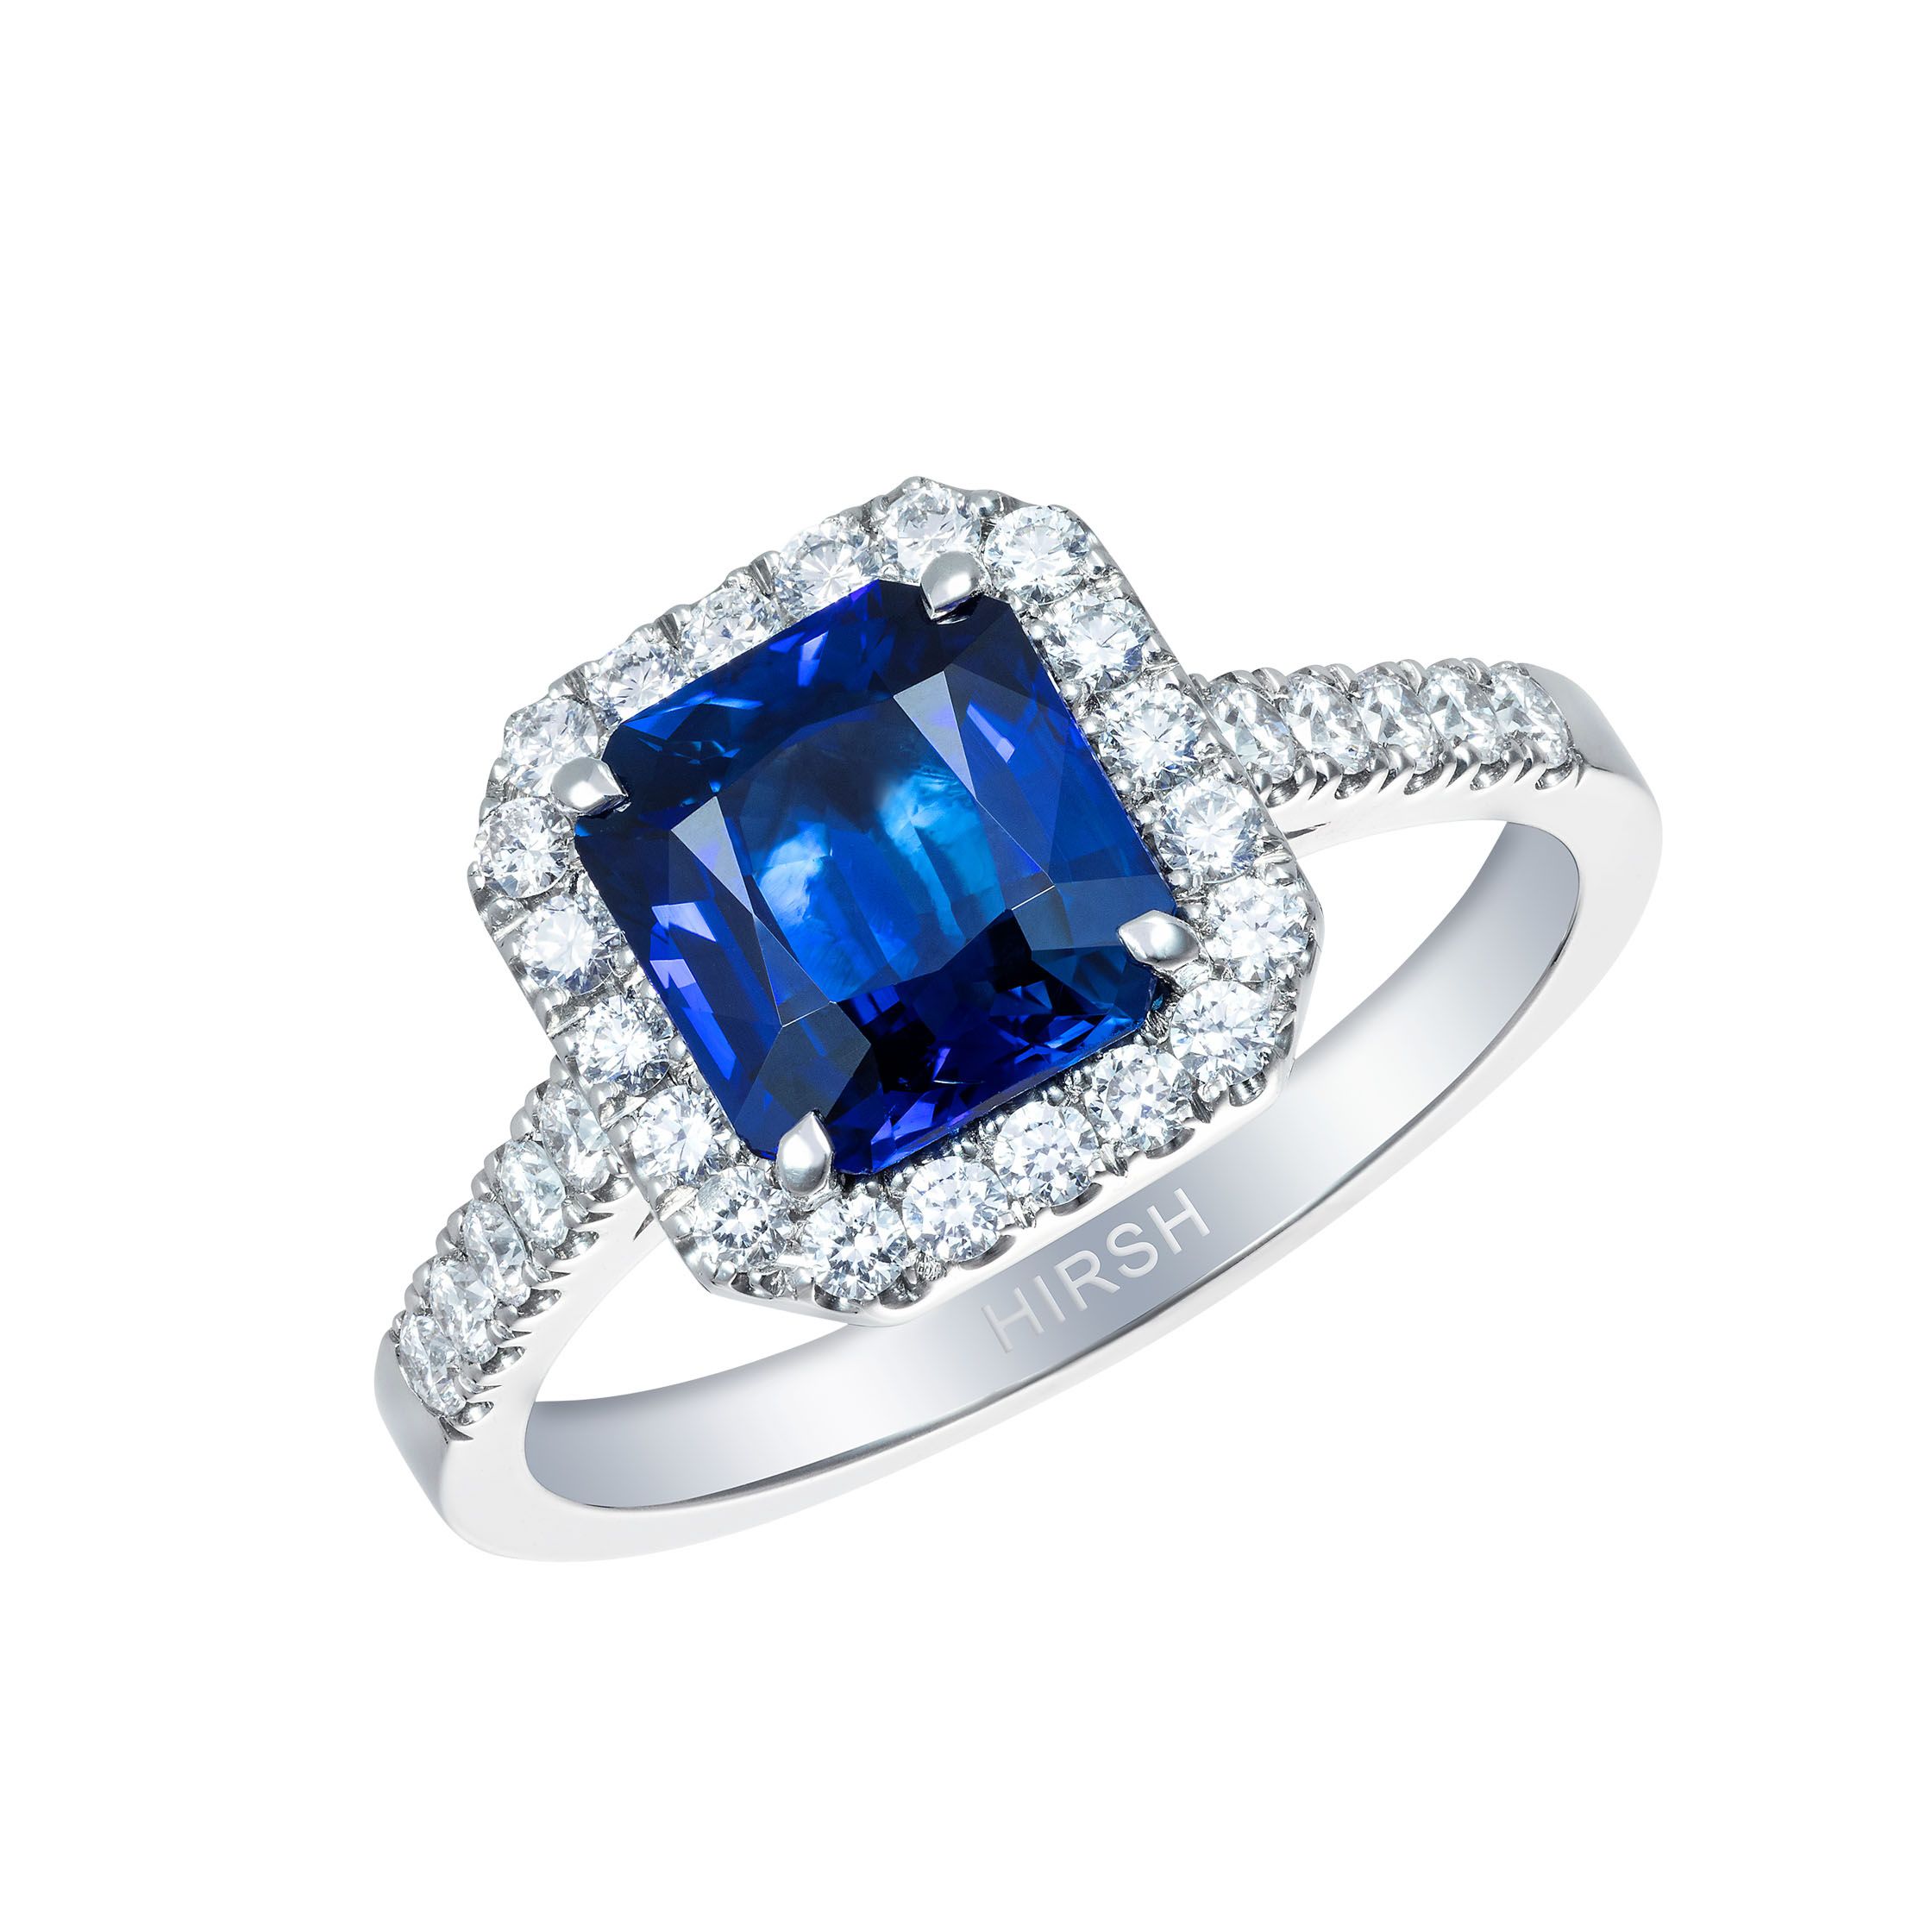 Sapphire Engagement Rings vs Diamond Engagement Rings | With Clarity